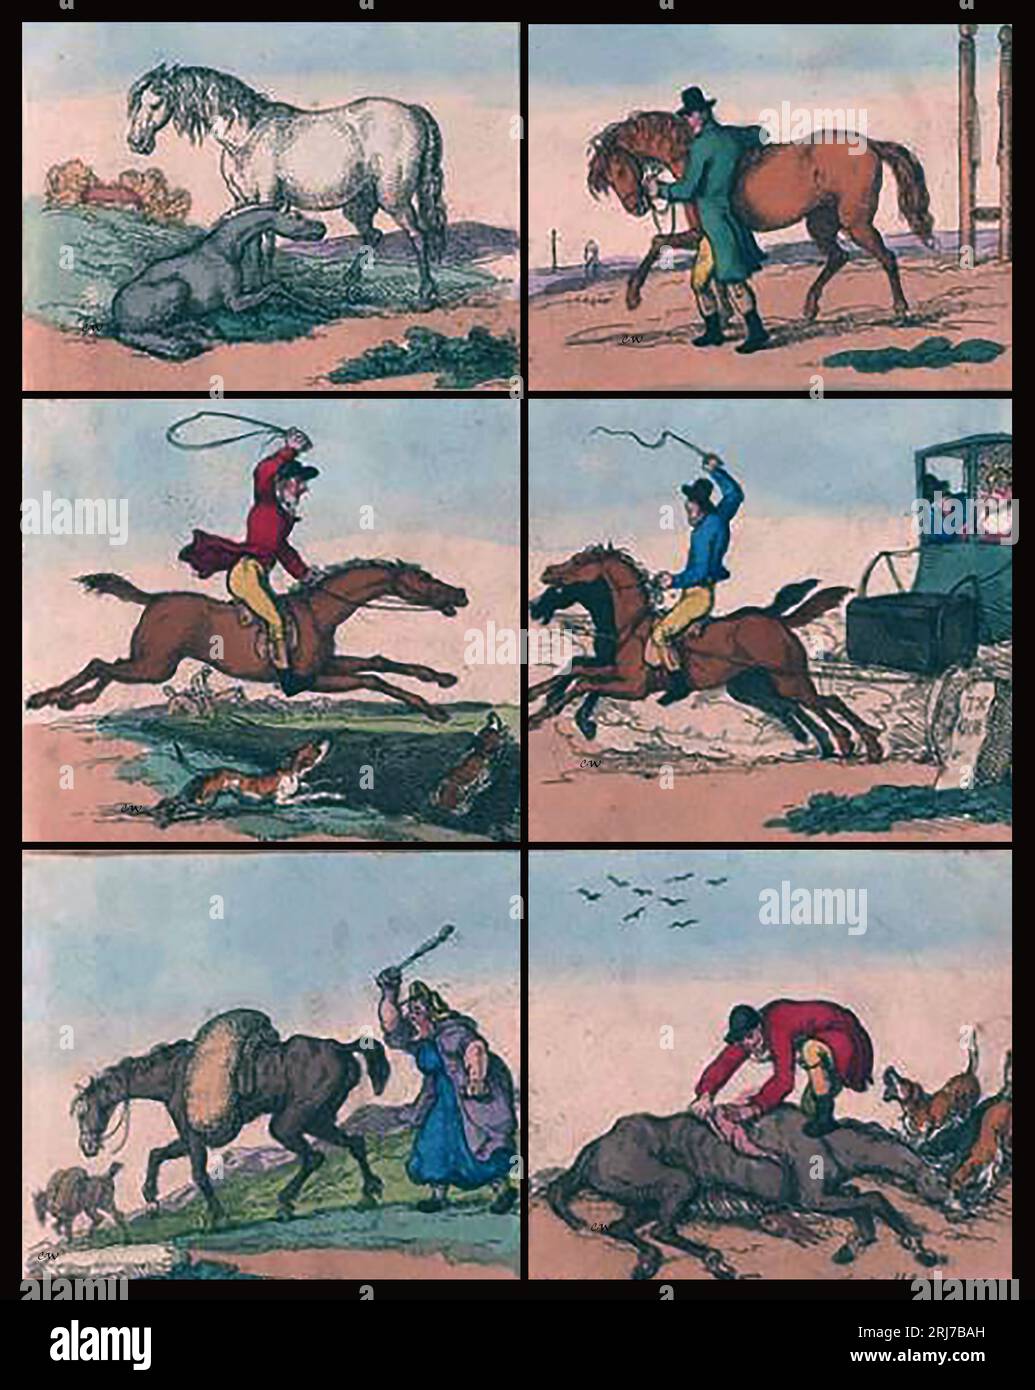 1811 illustration showing the lifespan of the average horse, showing its gradual use and misuse until it ends up as horse meat. Stock Photo